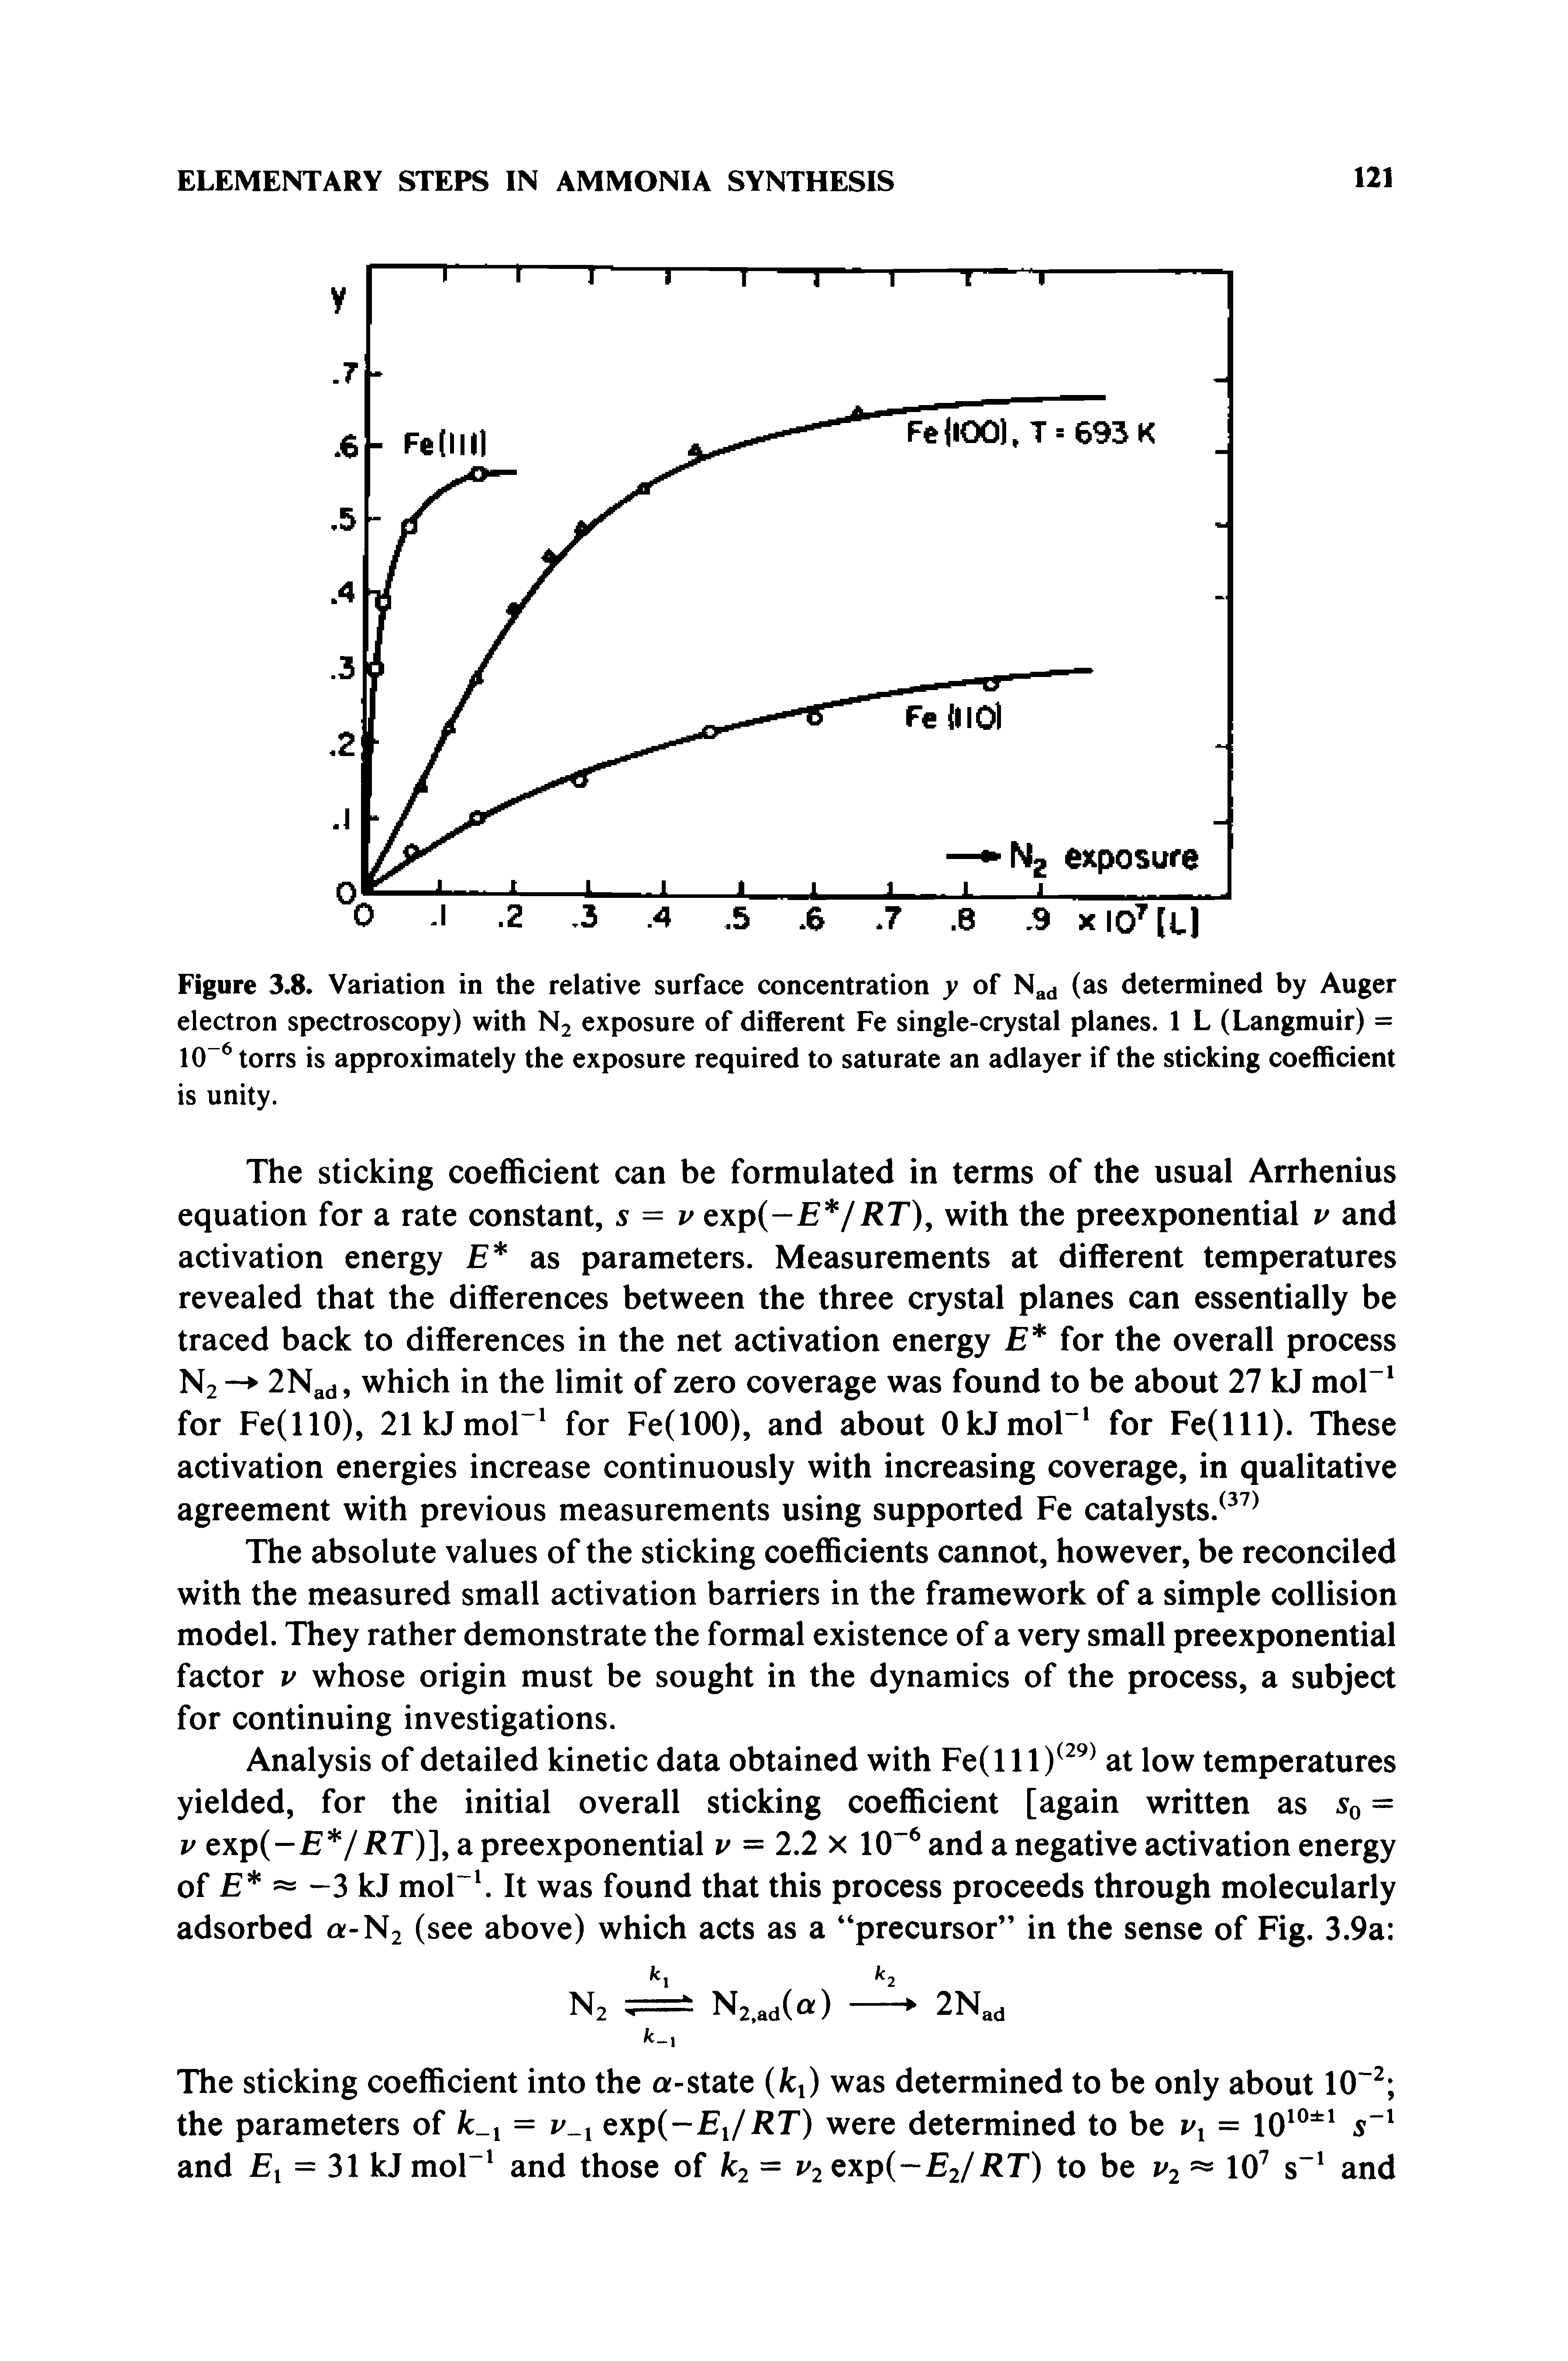 Figure 3.8. Variation in the relative surface concentration y of Nad determined by Auger electron spectroscopy) with N2 exposure of different Fe single-crystal planes. 1 L (Langmuir) = 10" torrs is approximately the exposure required to saturate an adlayer if the sticking coefficient is unity.